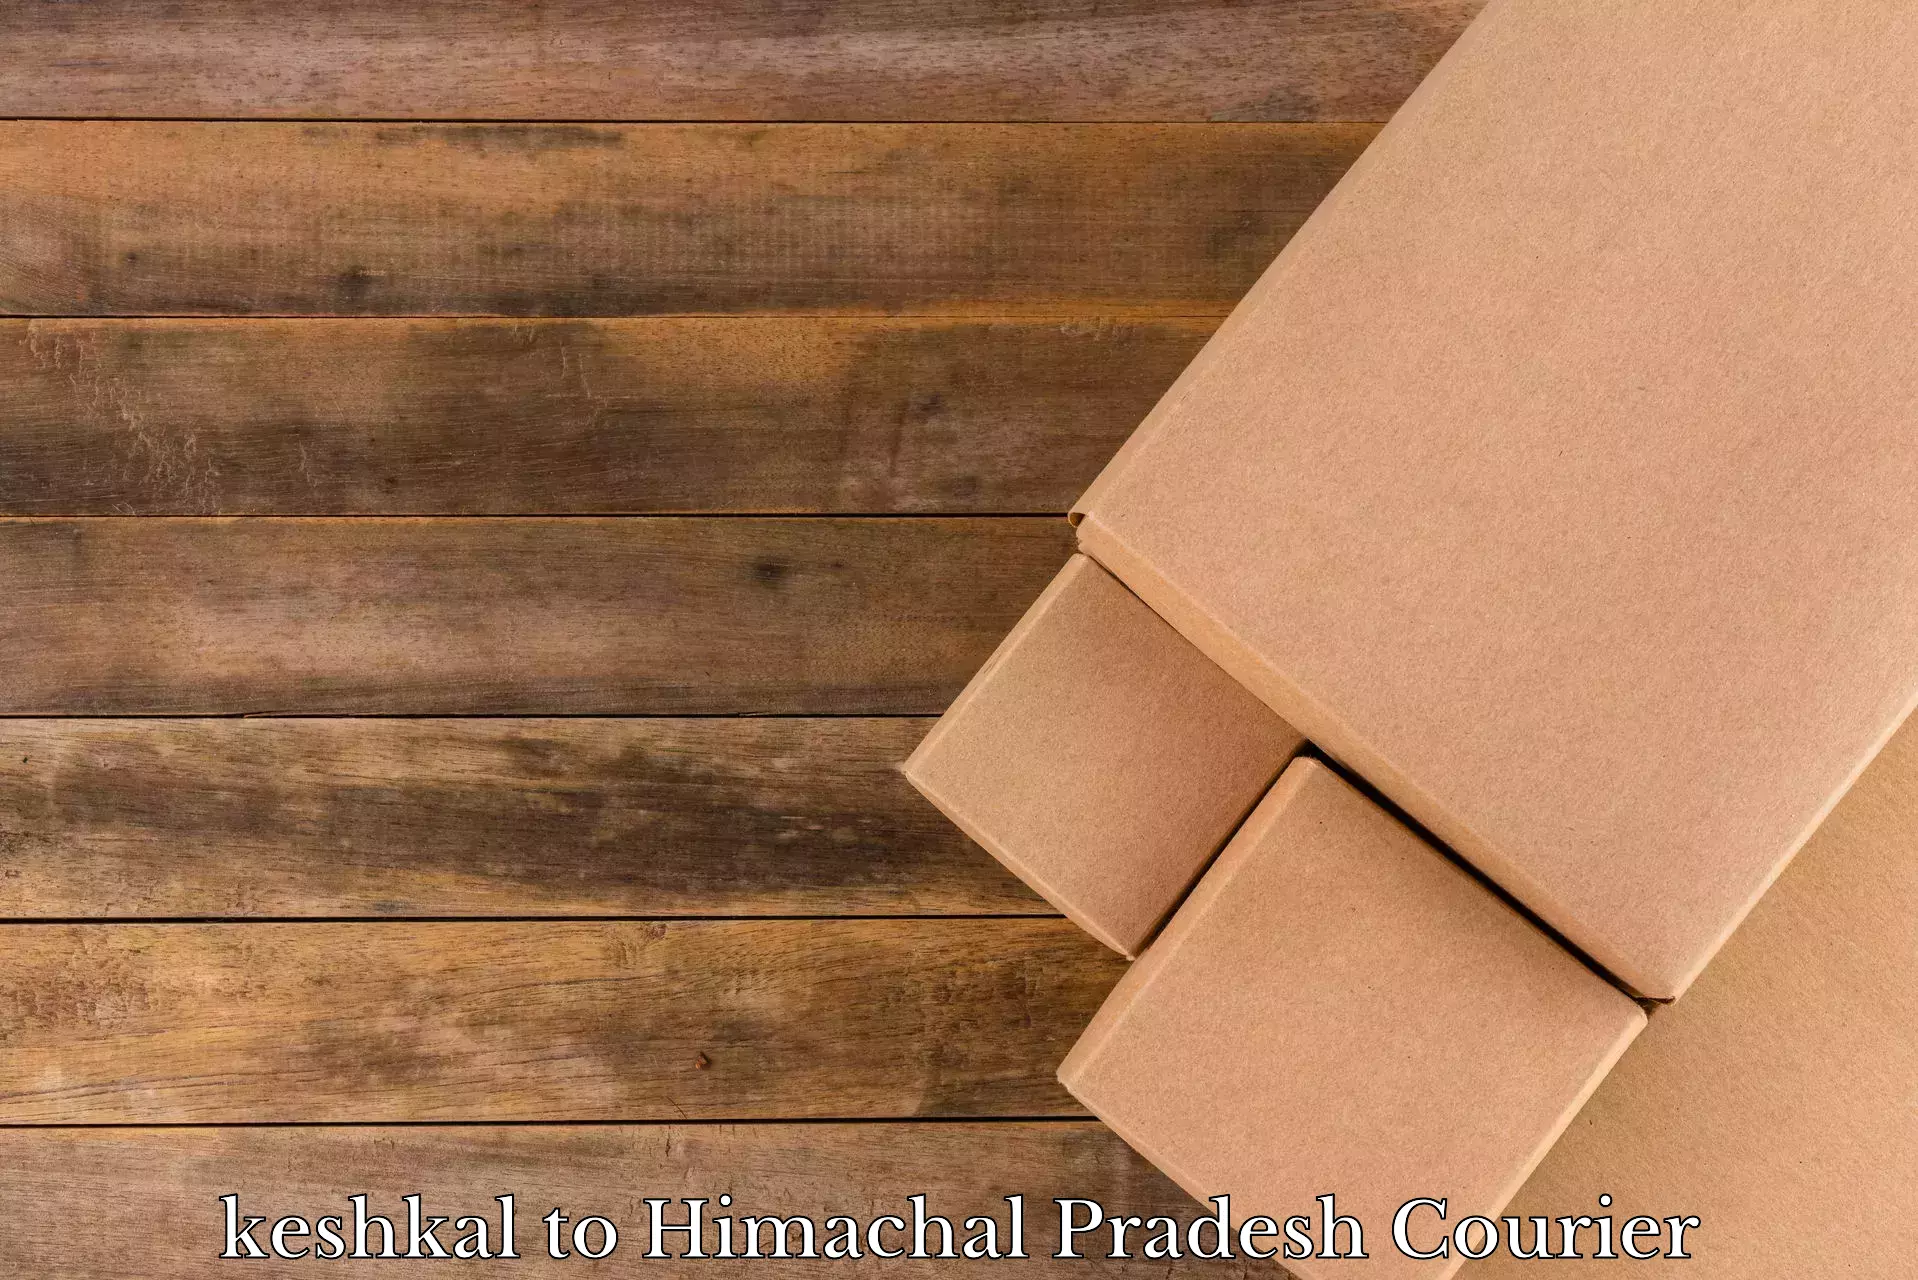 Efficient relocation services keshkal to Himachal Pradesh